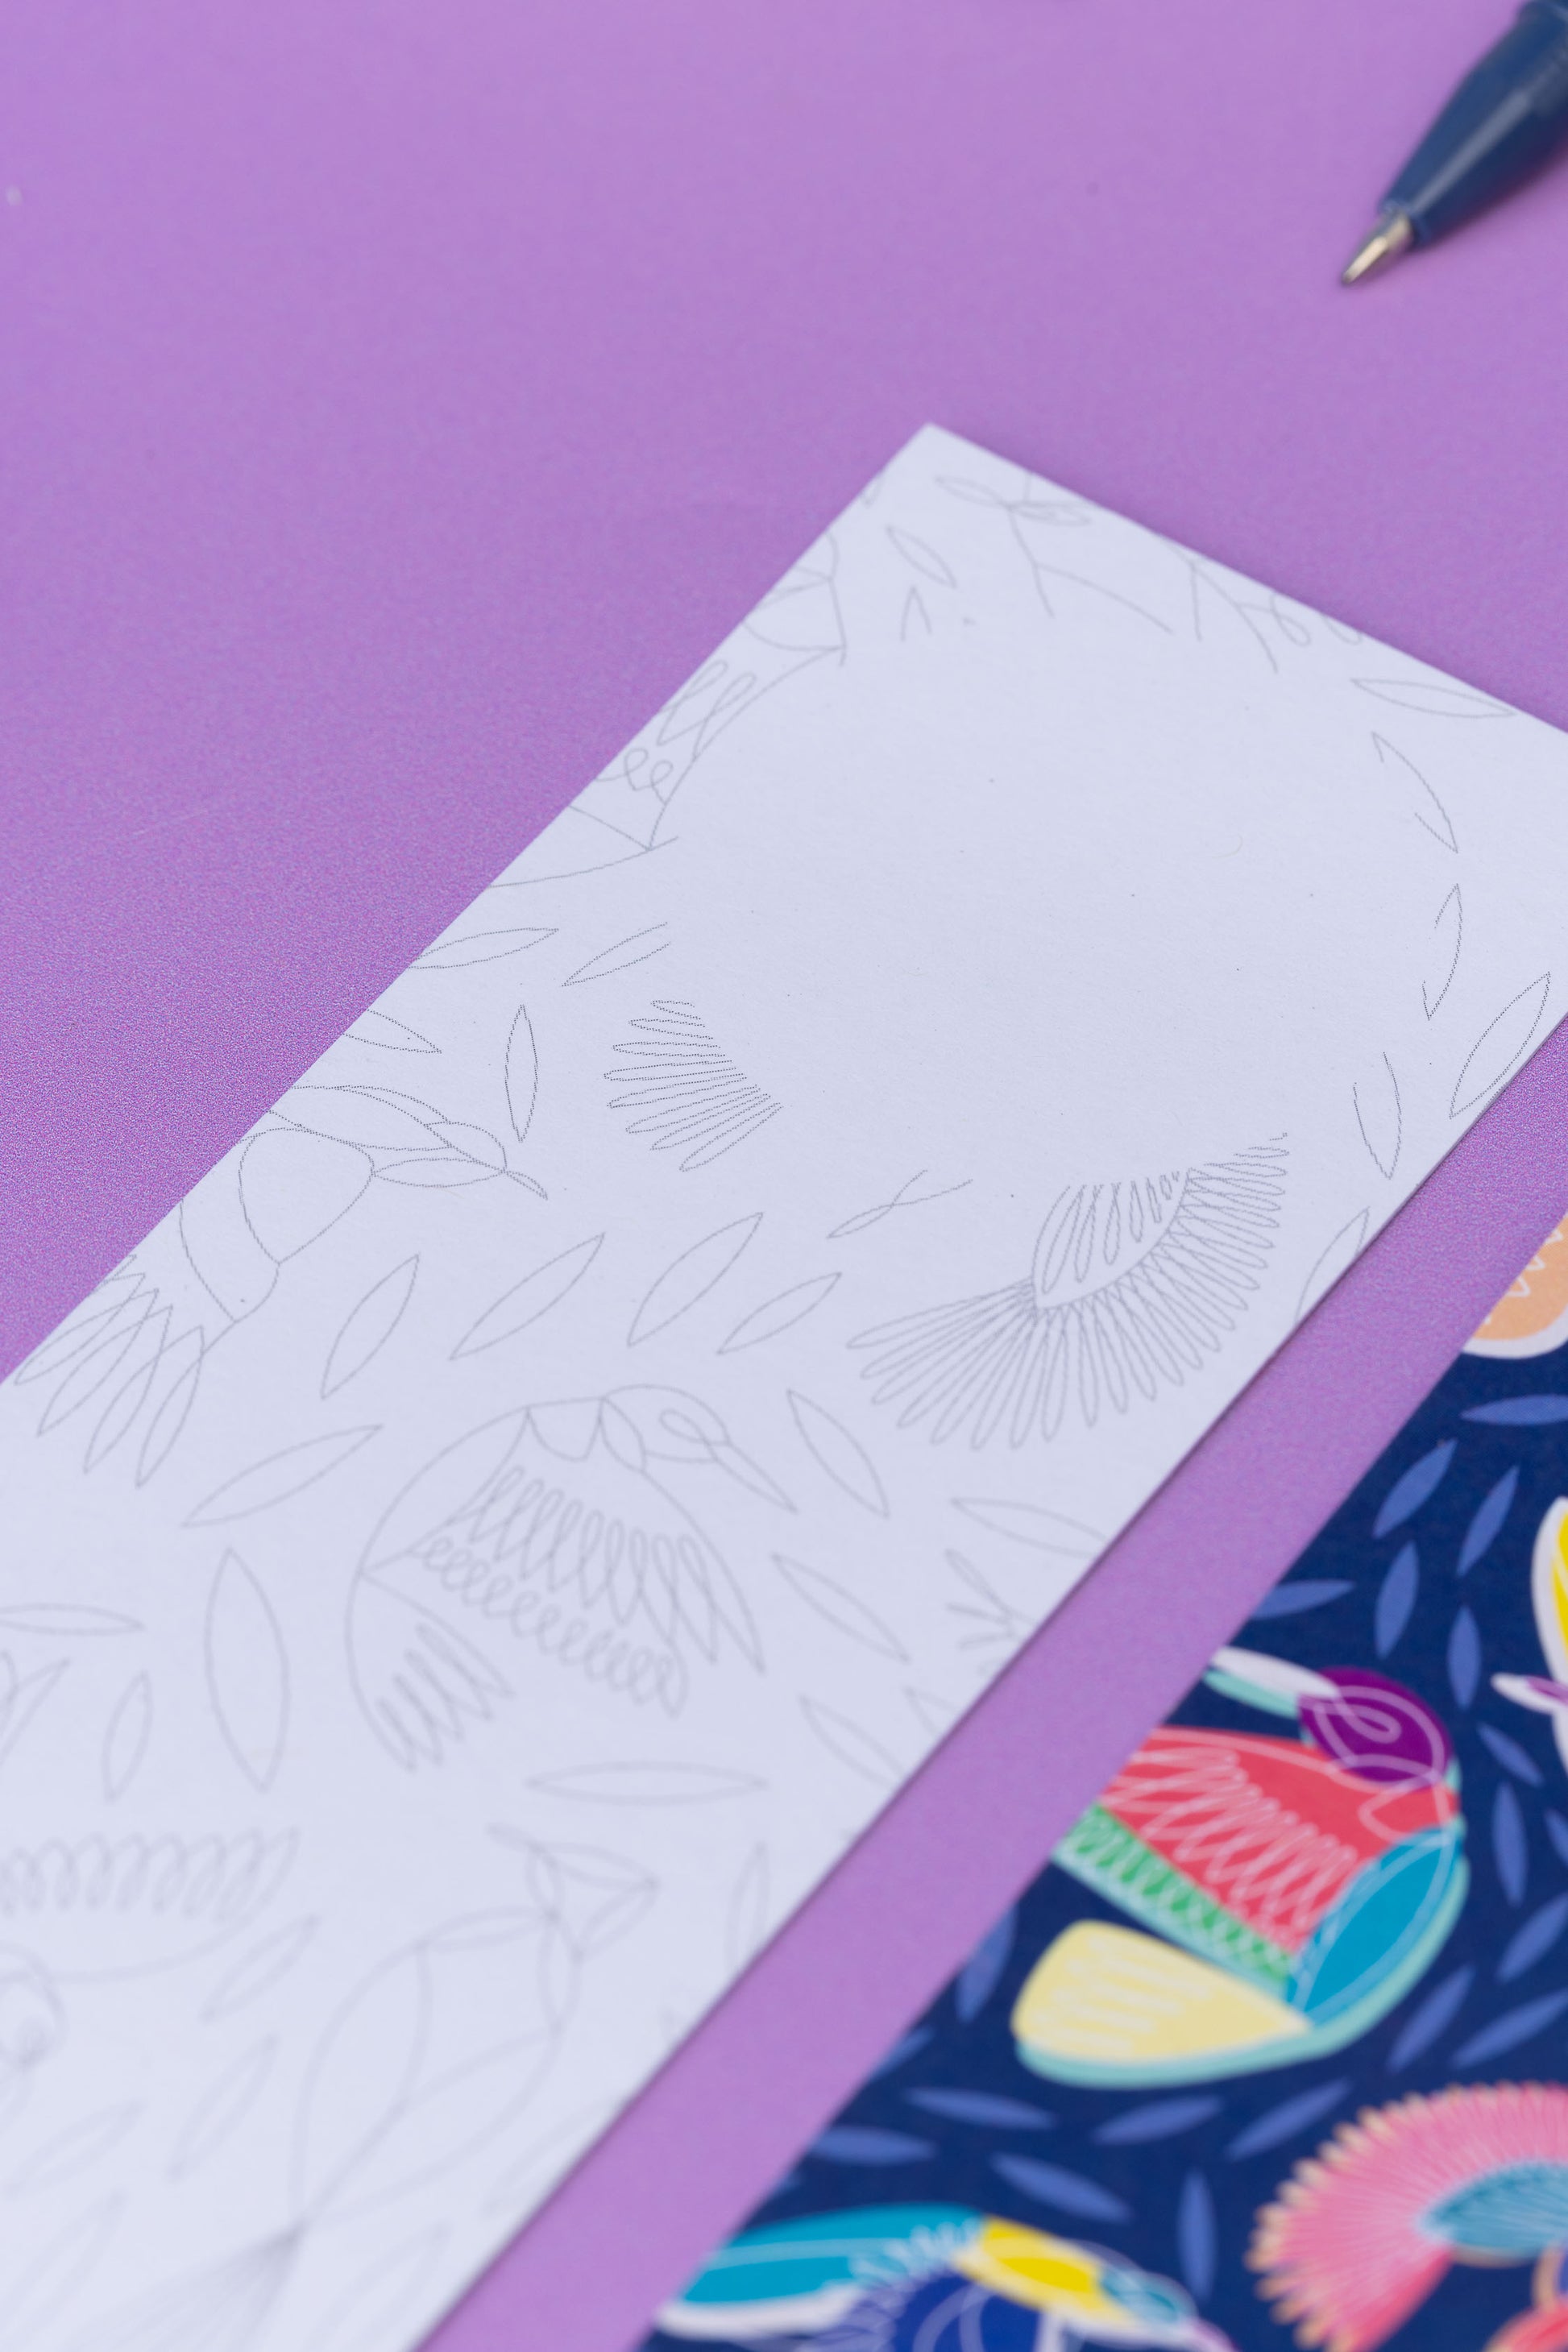 Two of the paradise double-sided bookmarks, on a lilac desk. The main focus is on the top of the monochrome side of the bookmark, with the blank circle for writing at the top of the marker.  The full-pattern side of the bookmark is in the bottom right corner slightly out of focus.